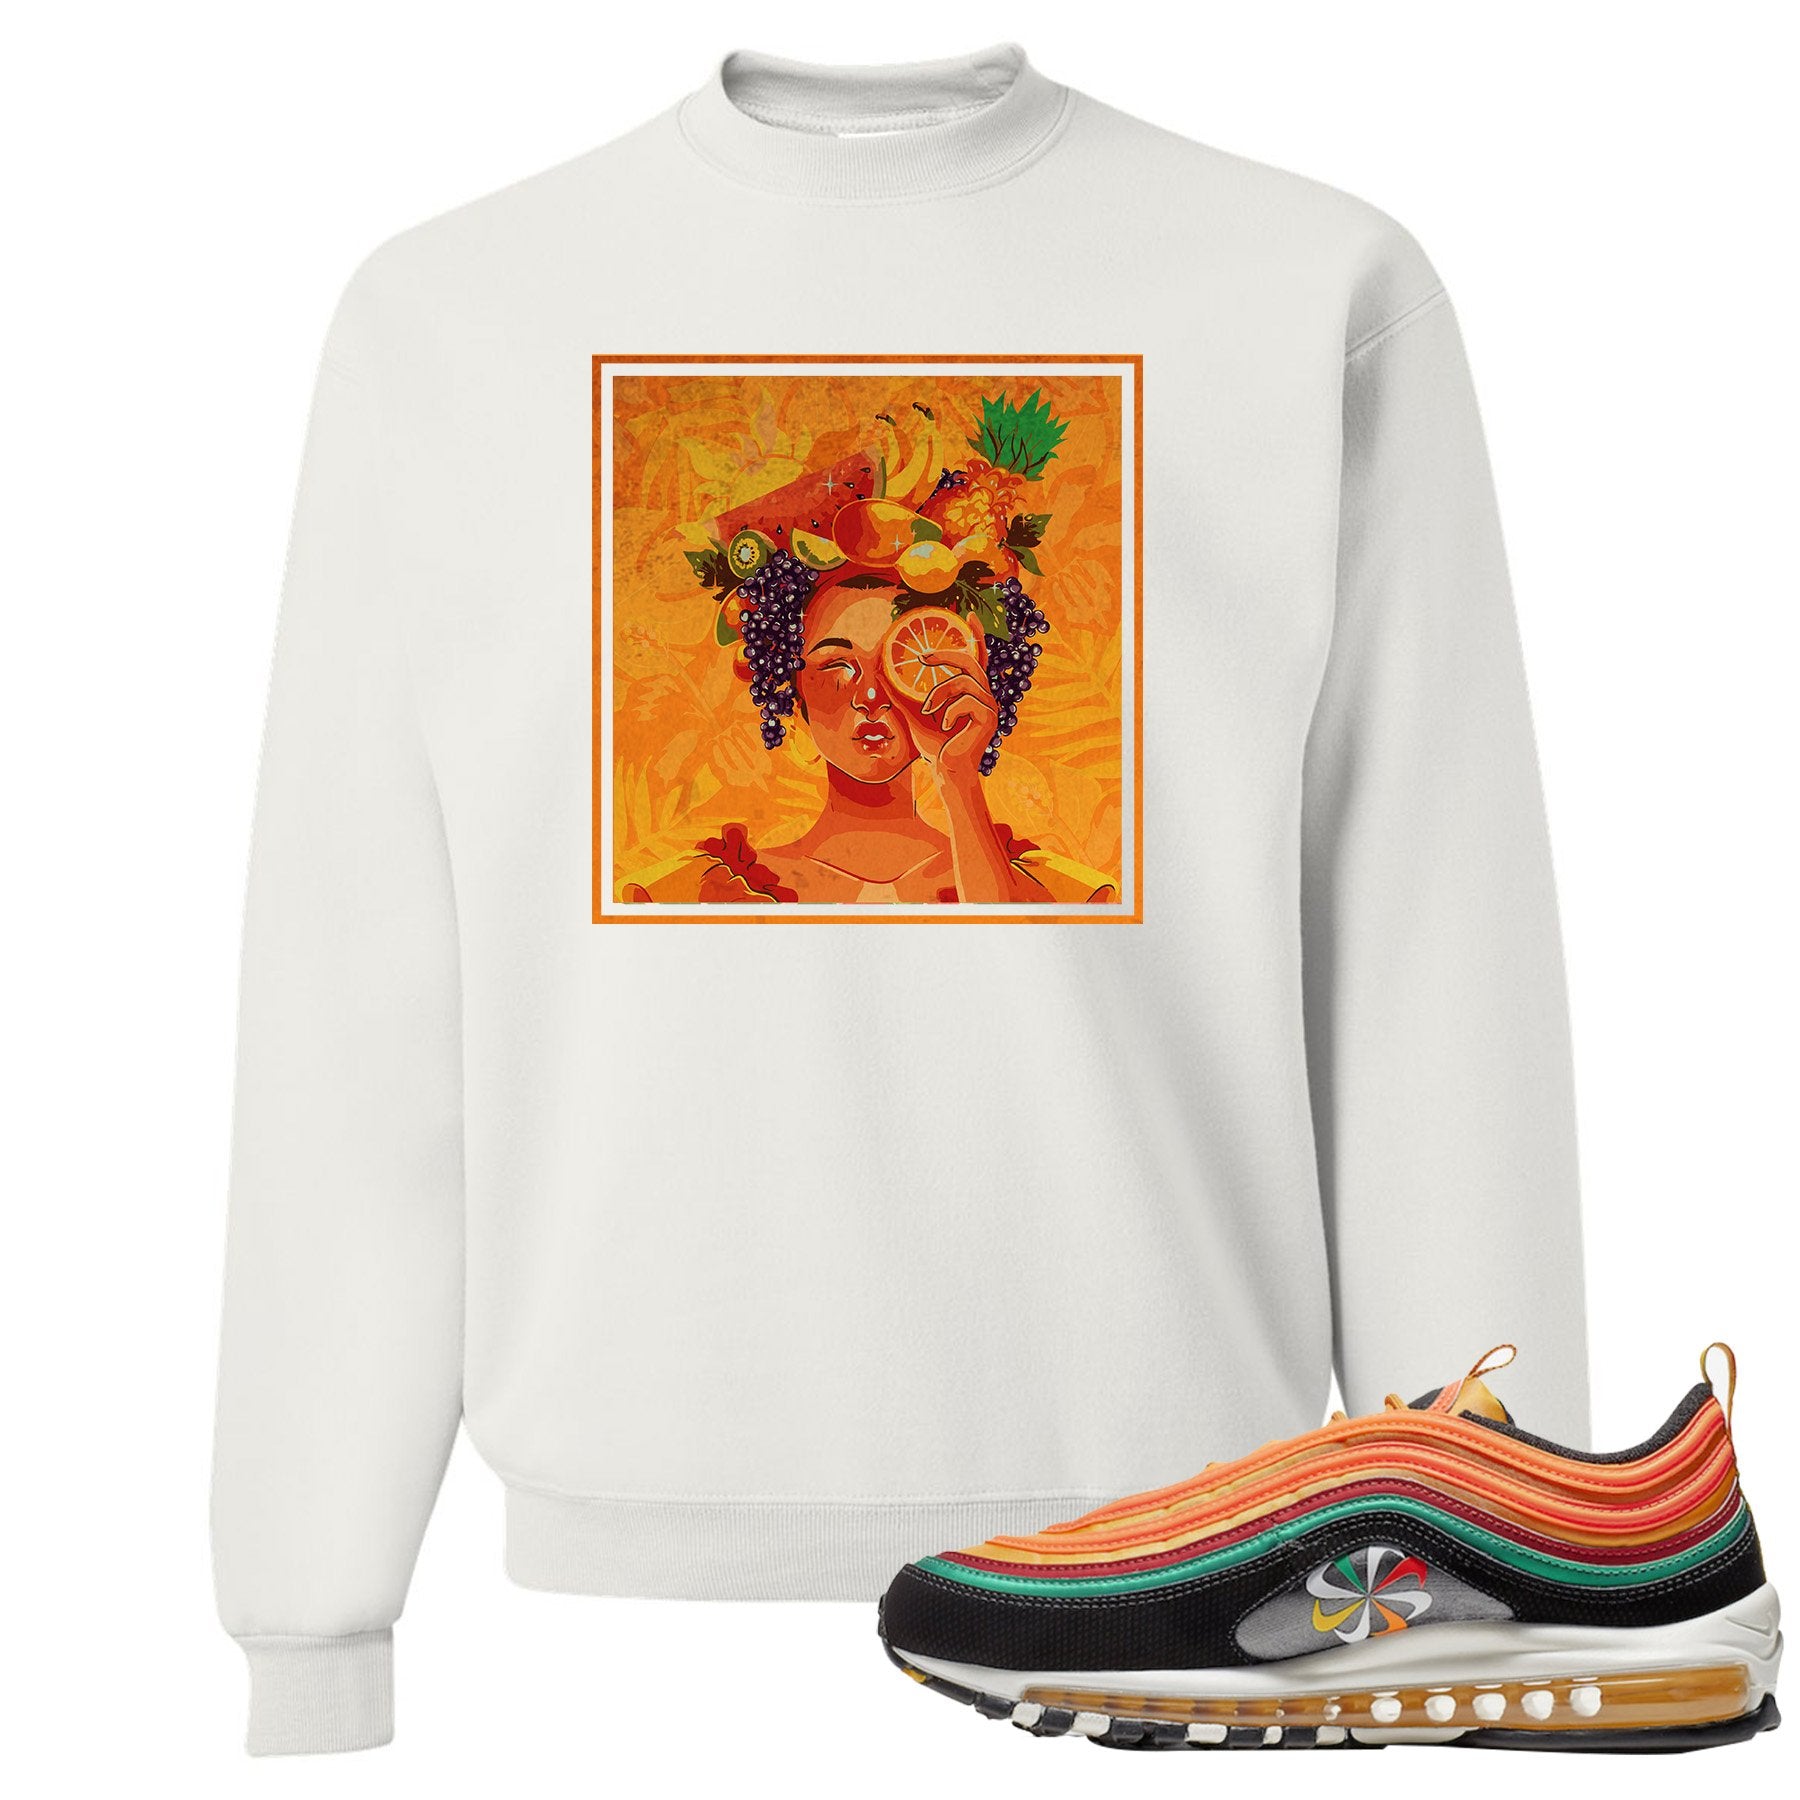 Printed on the front of the Air Max 97 sunburst white sneaker matching crewneck sweatshirt is the Lady Fruit logo